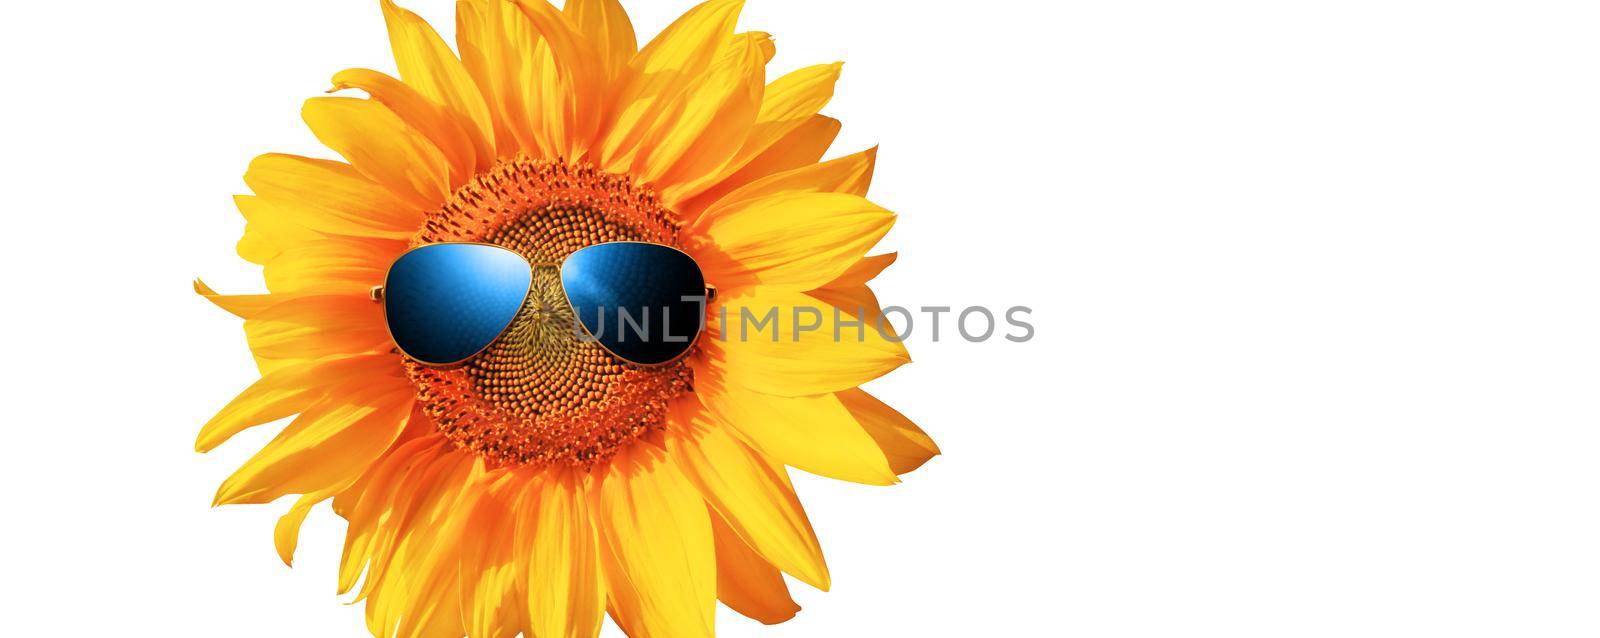 Isolated sunflower with sunglasses and happy face